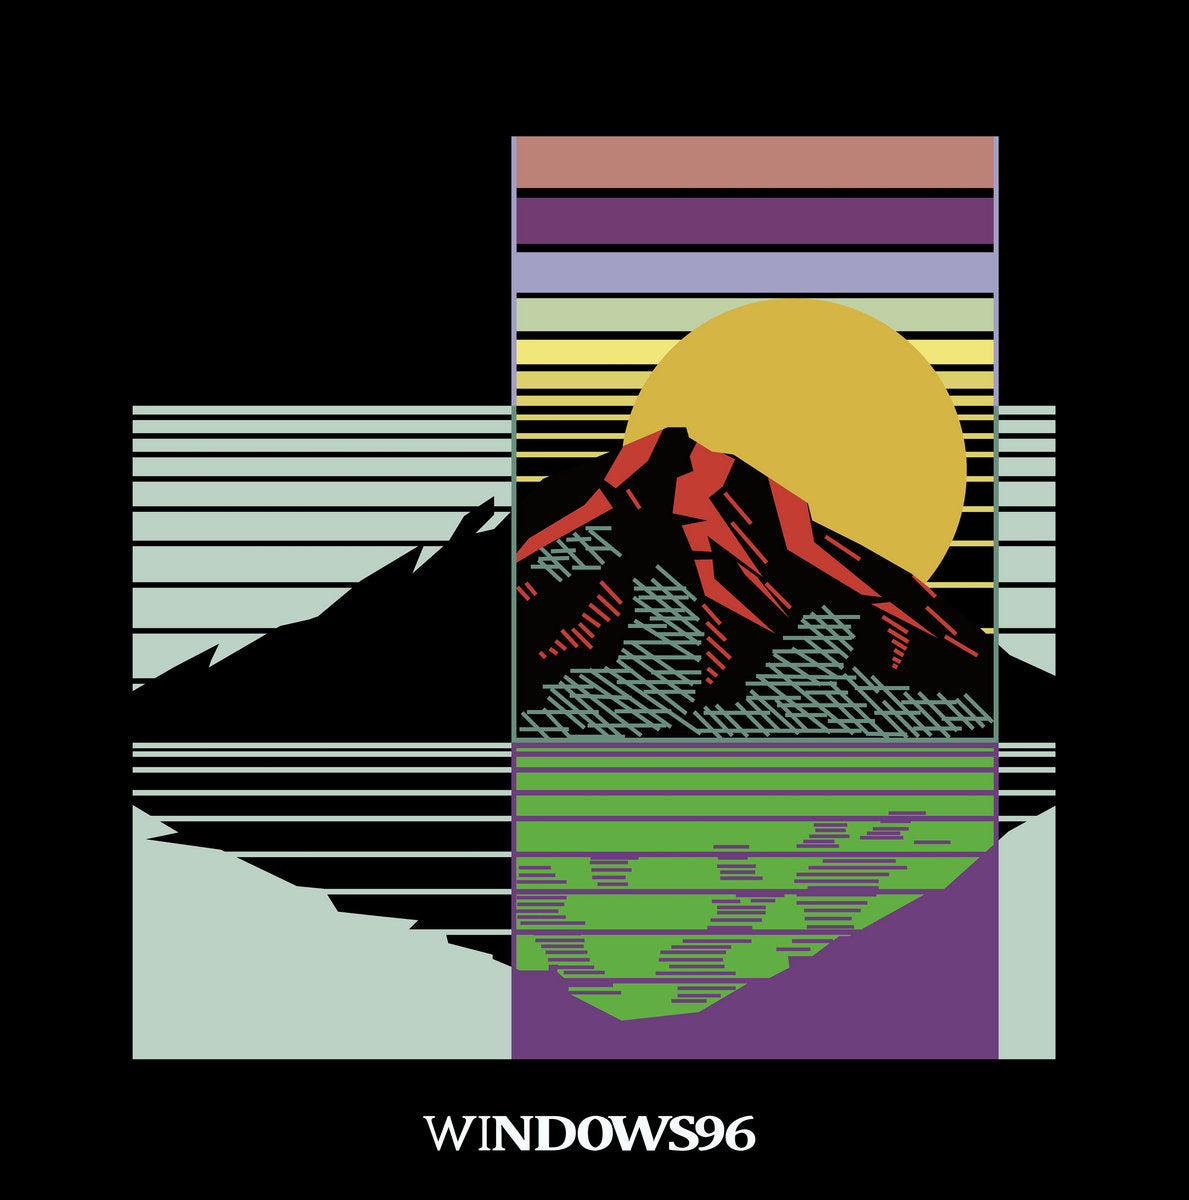 [SOLD OUT] WINDOWS96 "One Hundred Mornings" vinyl LP (color)